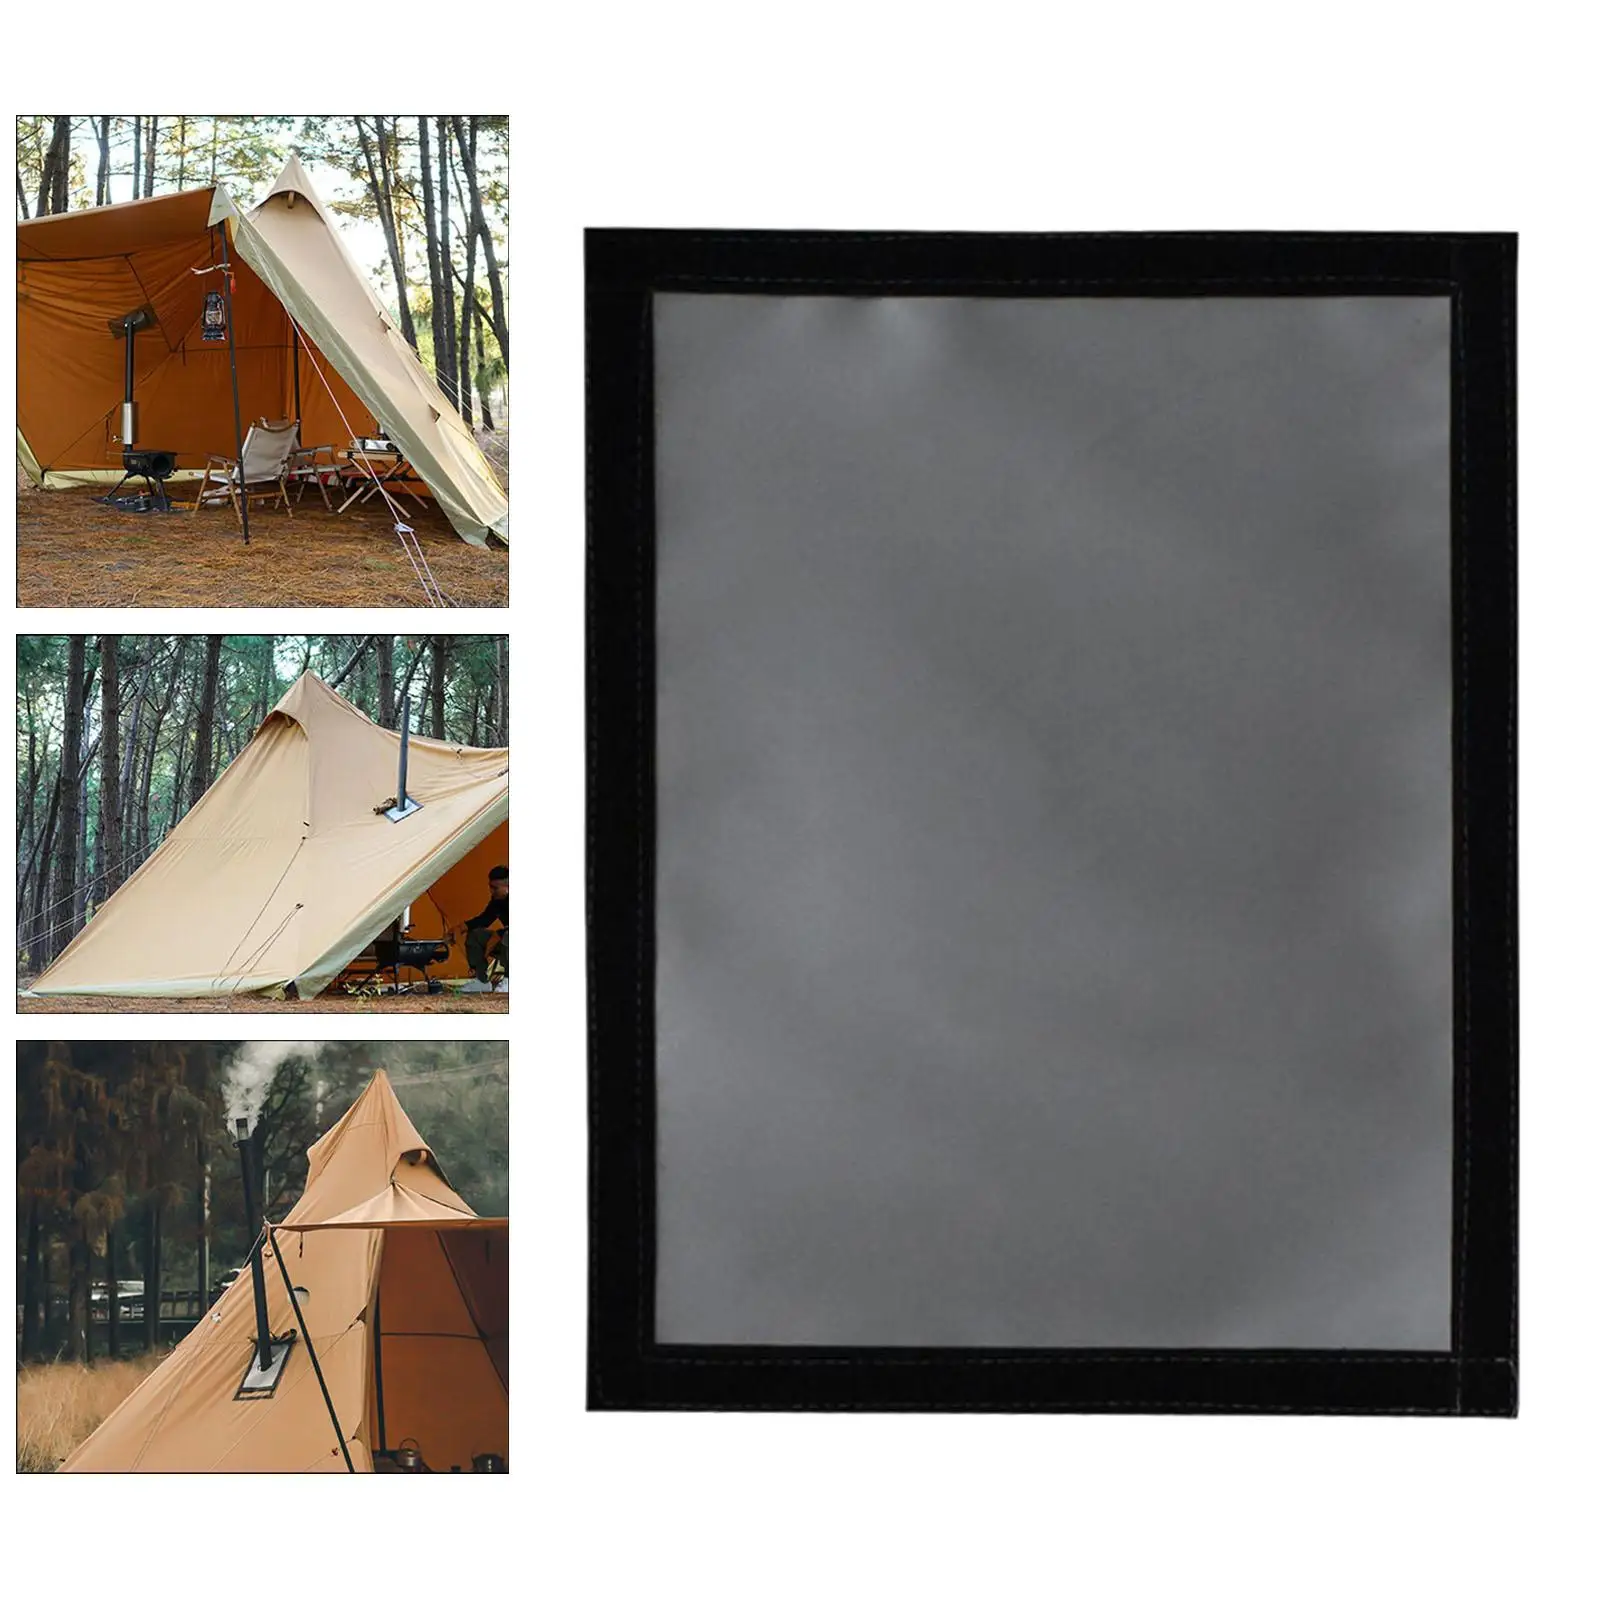 Hot Tent Stove  Firewood Stove Retardant for Backpacking Camping